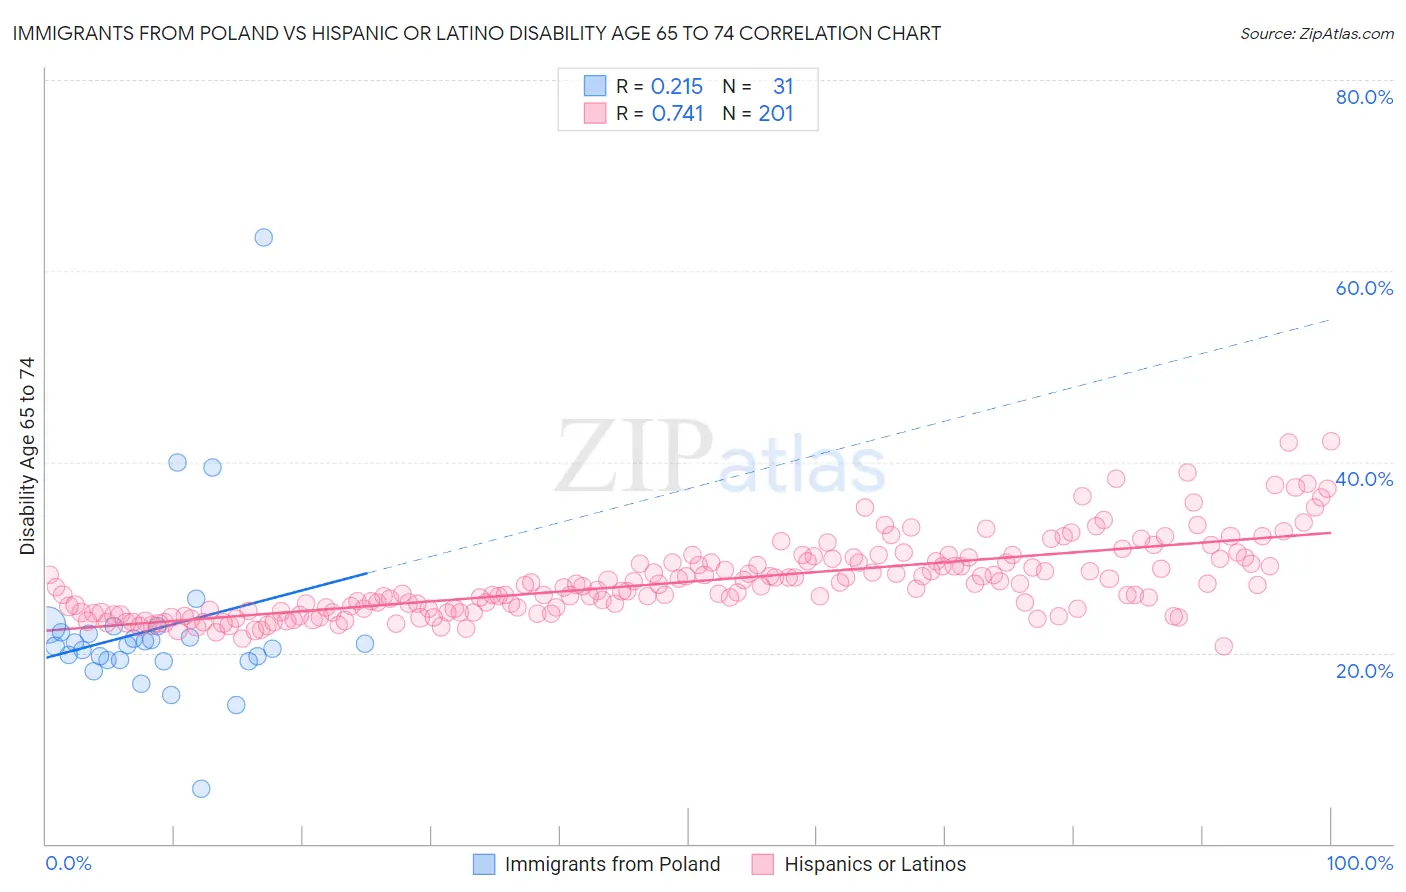 Immigrants from Poland vs Hispanic or Latino Disability Age 65 to 74